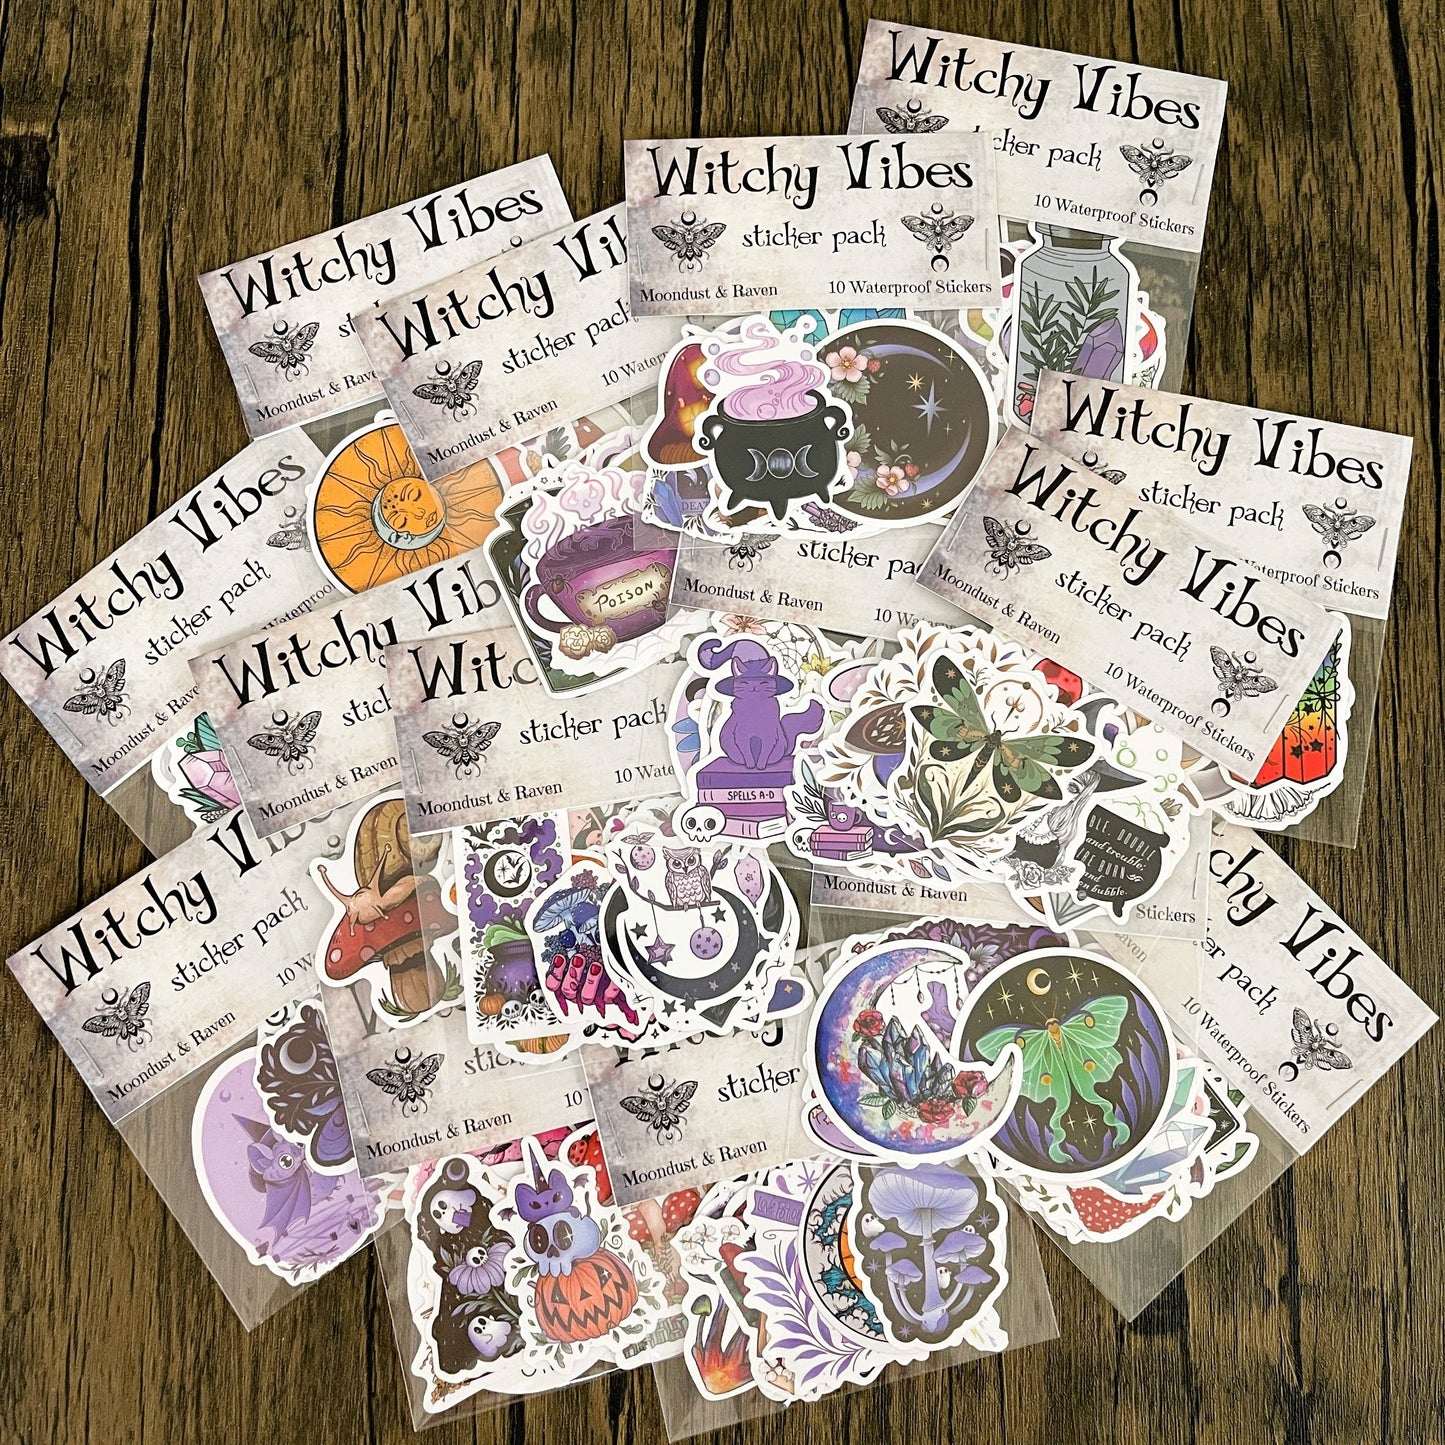 Witchy Vibes Sticker Packs, Waterproof Witchy Stickers